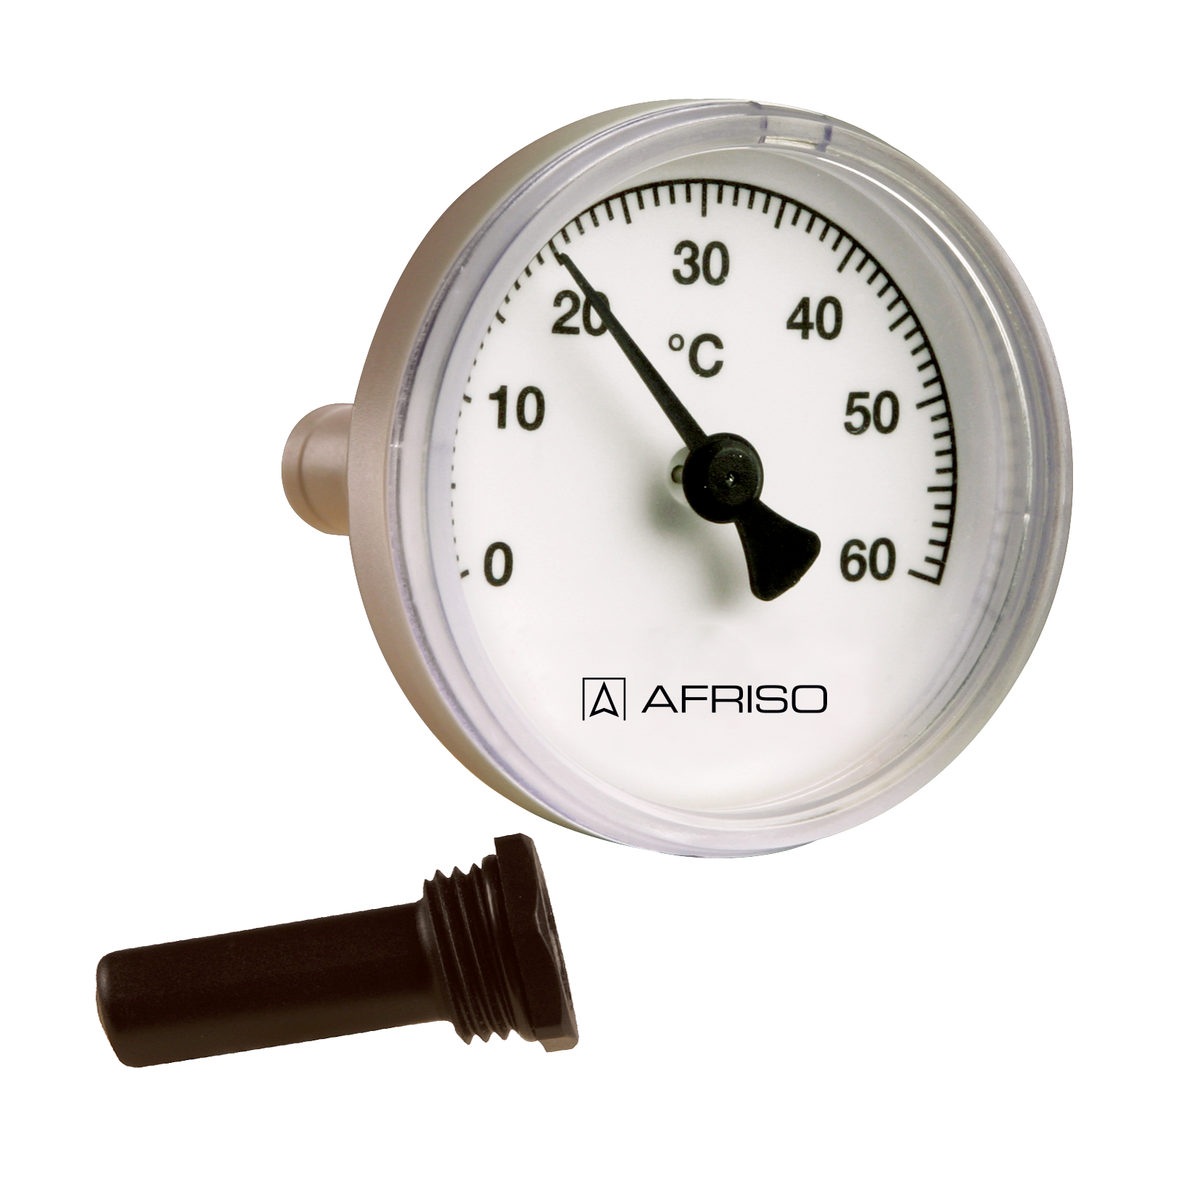 AFRISO Bimetall-Thermometer BiTh 50 K 0/60C 40mm 1/2 axial Kl.2 SAL 87670 object_image_57154imagemain_de